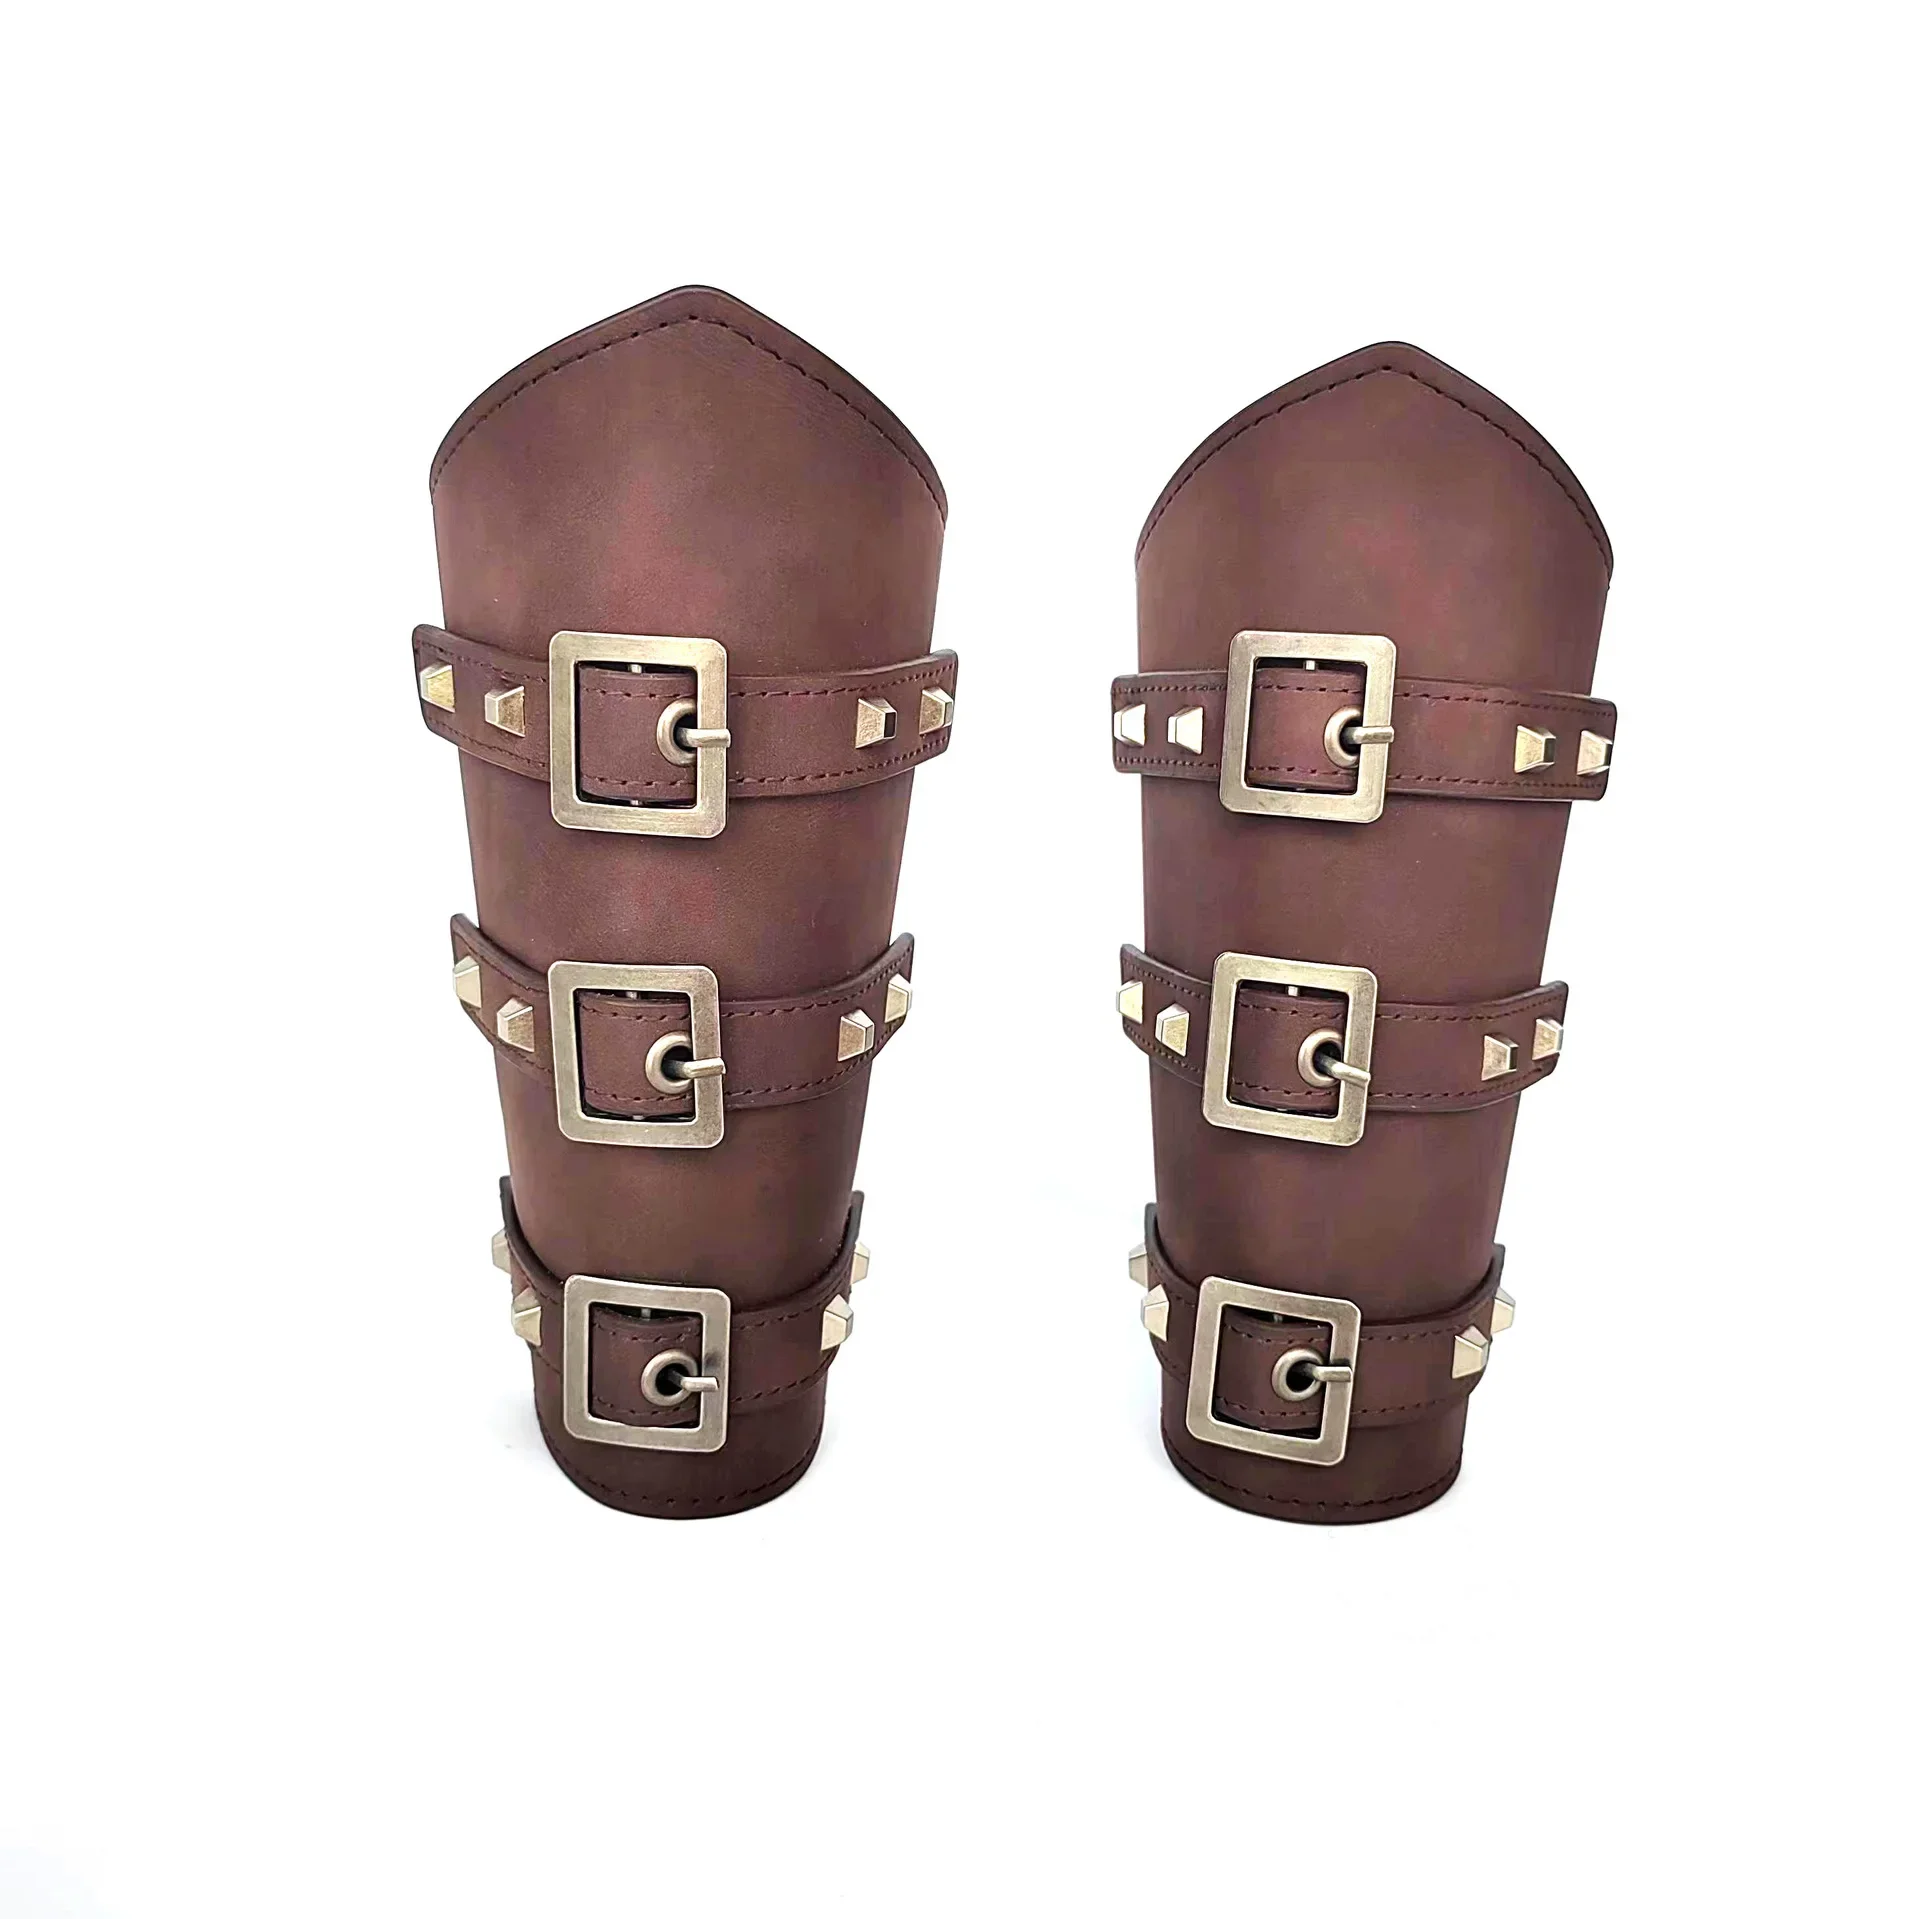 

2Pcs Medieval Cosplay PU Leather Armor Arm Warmer Lace-Up Men Viking Pirate Knight Gauntlet Wristband Bracer Steampunk Accessory